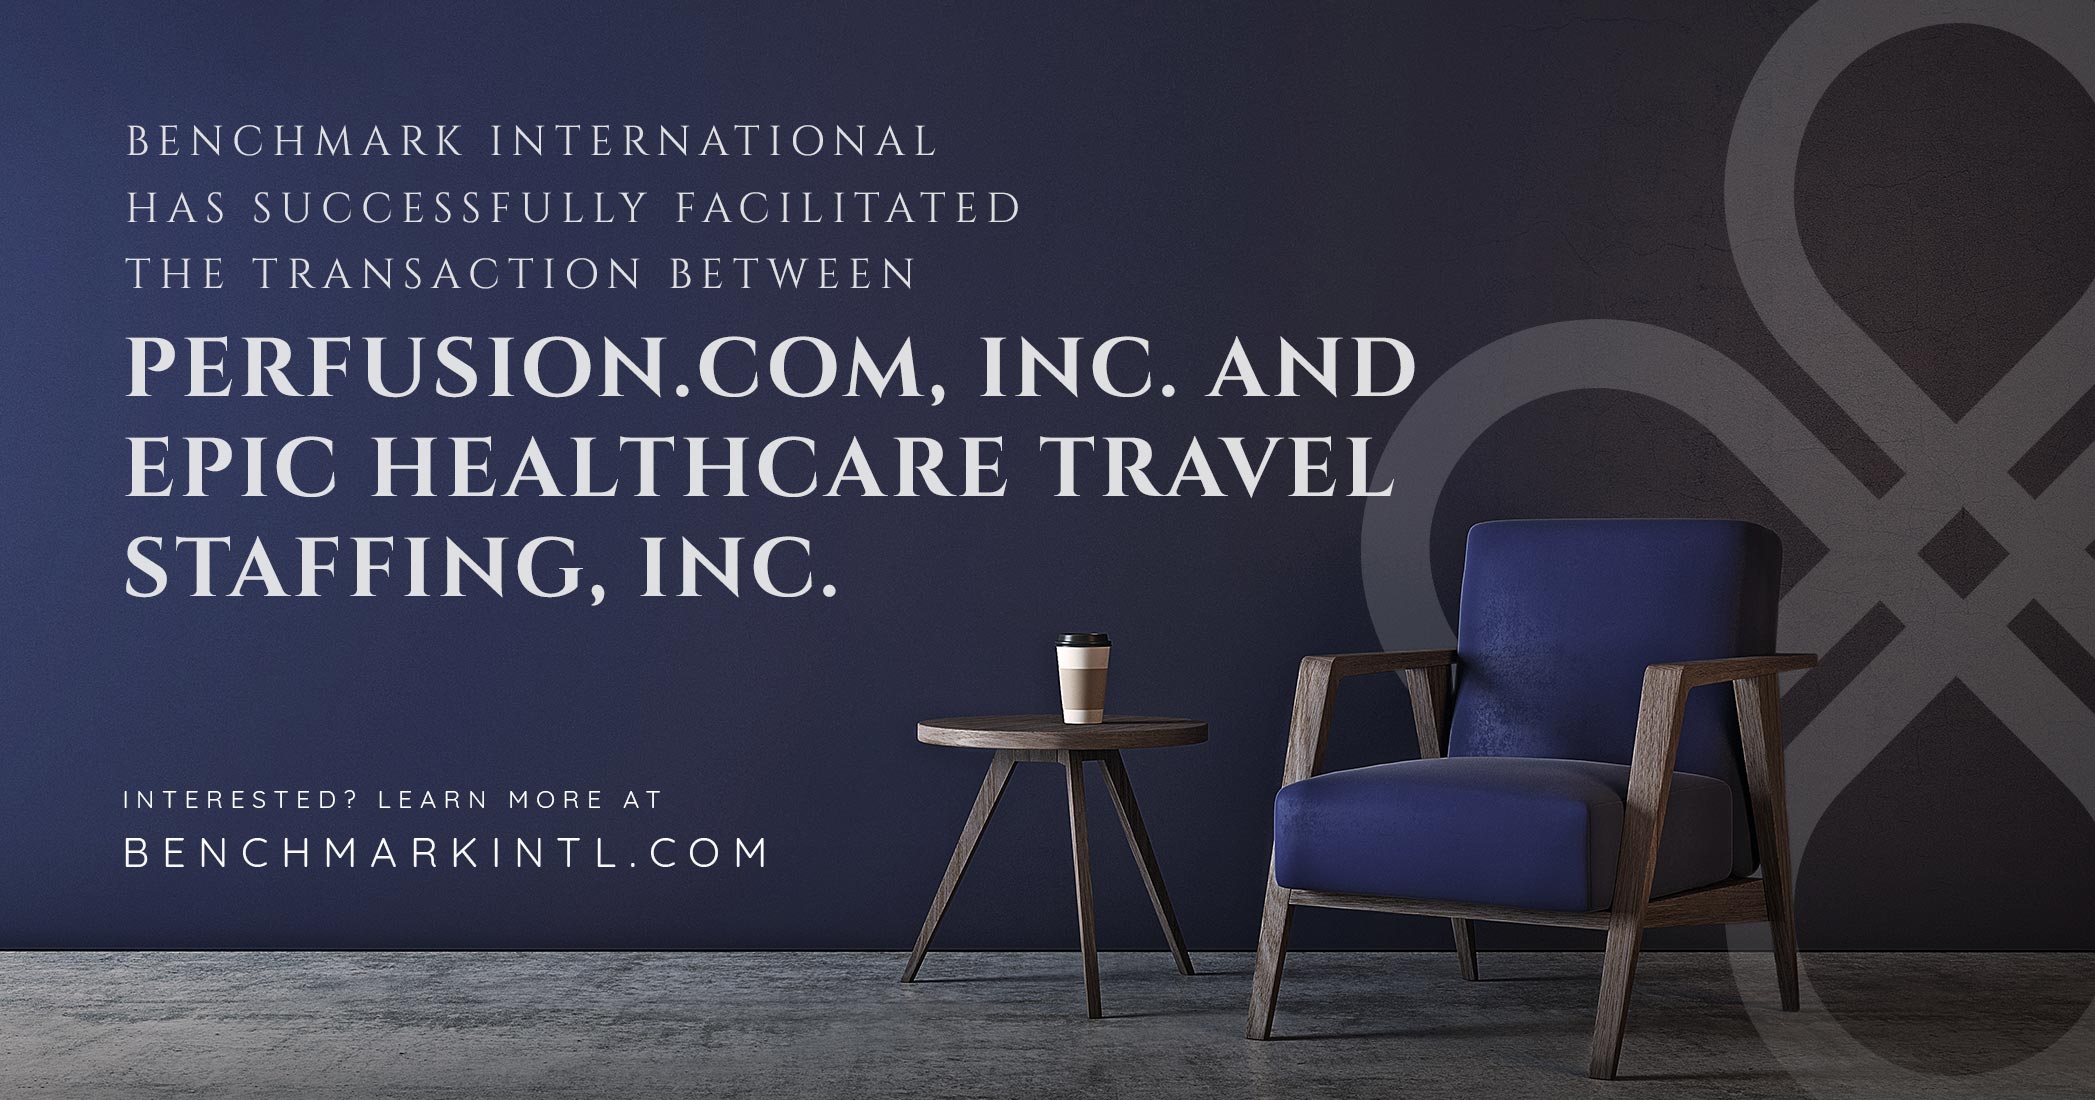 Benchmark International Successfully Facilitated the Transaction Between Perfusion.com, Inc. and Epic Healthcare Travel Staffing, Inc.